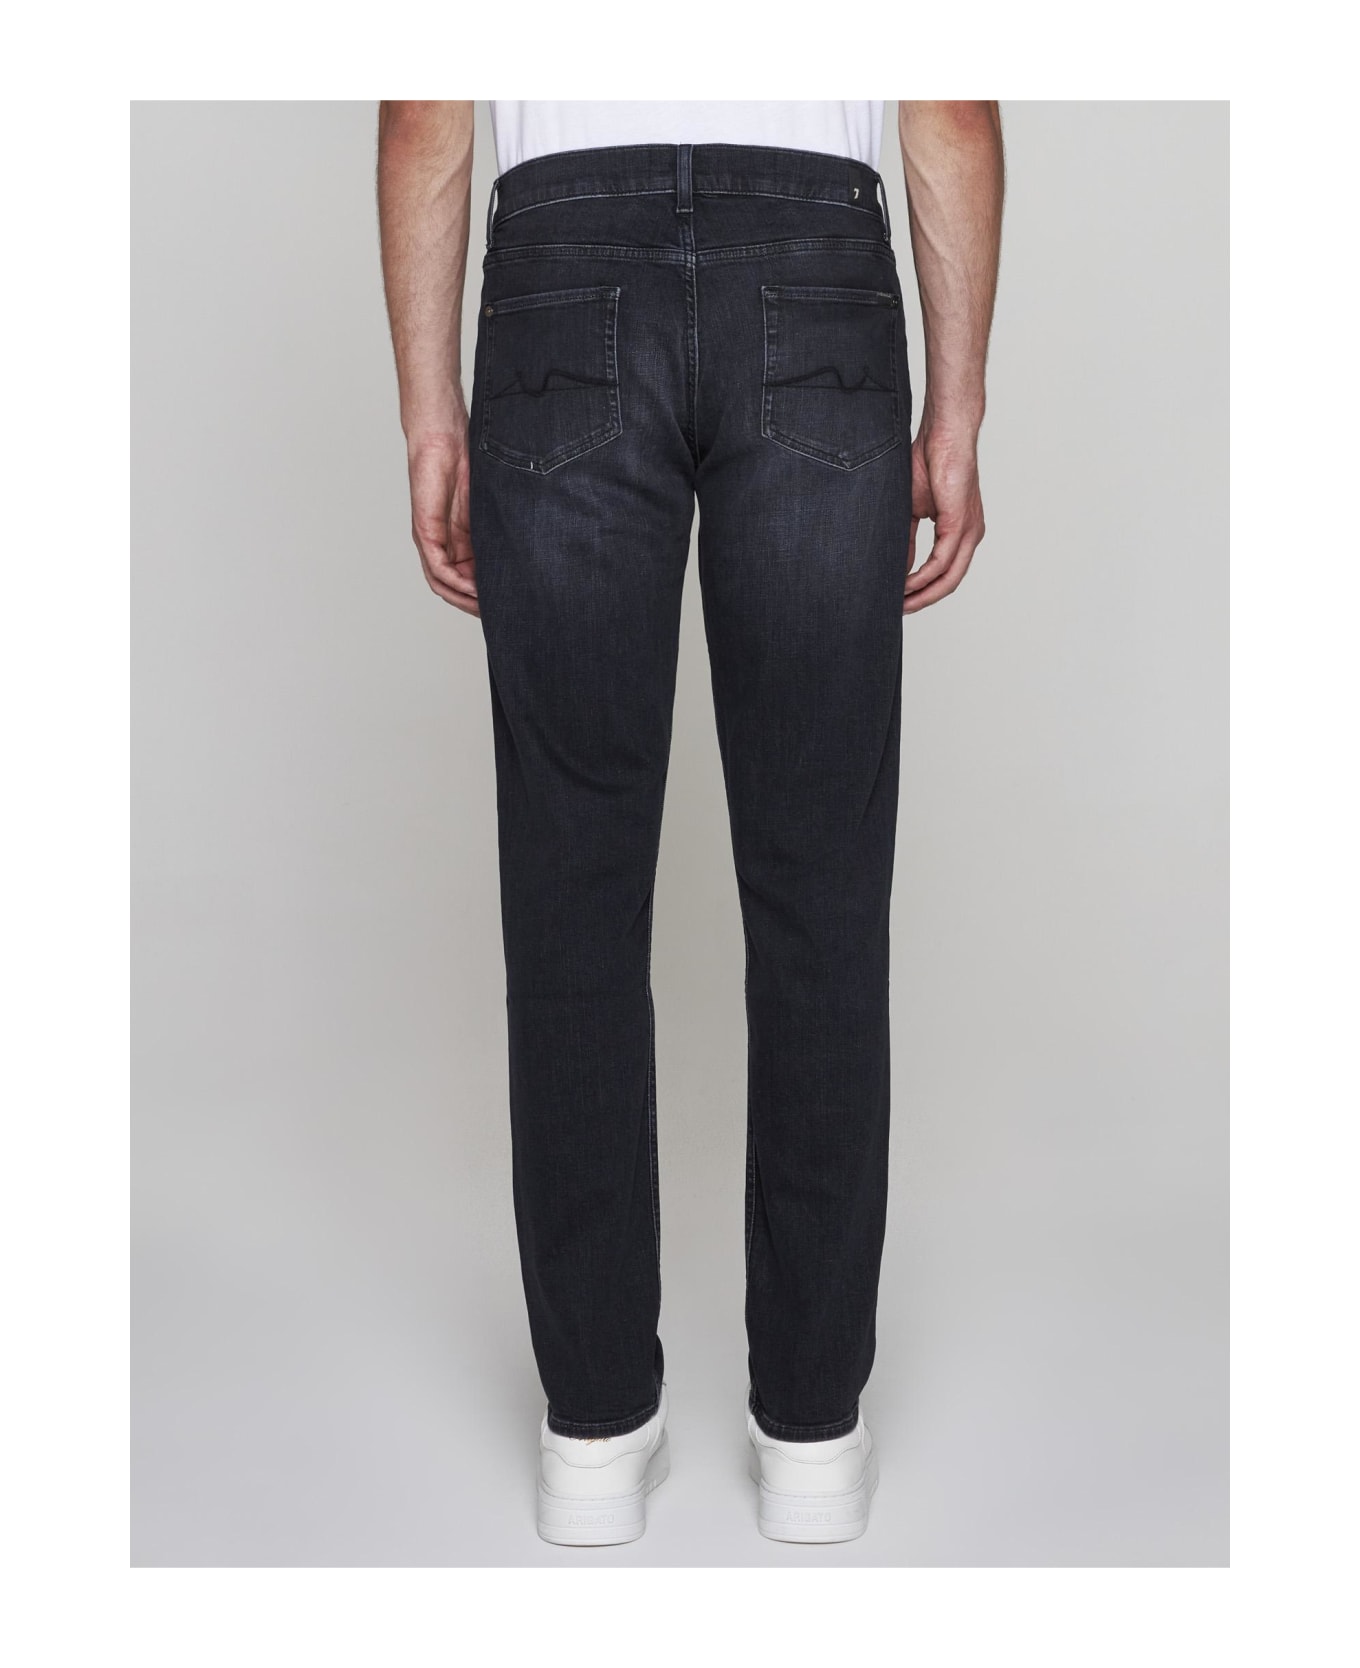 7 For All Mankind Slimmy Tapered Stretch Tek Idealist Jeans - BLACK デニム